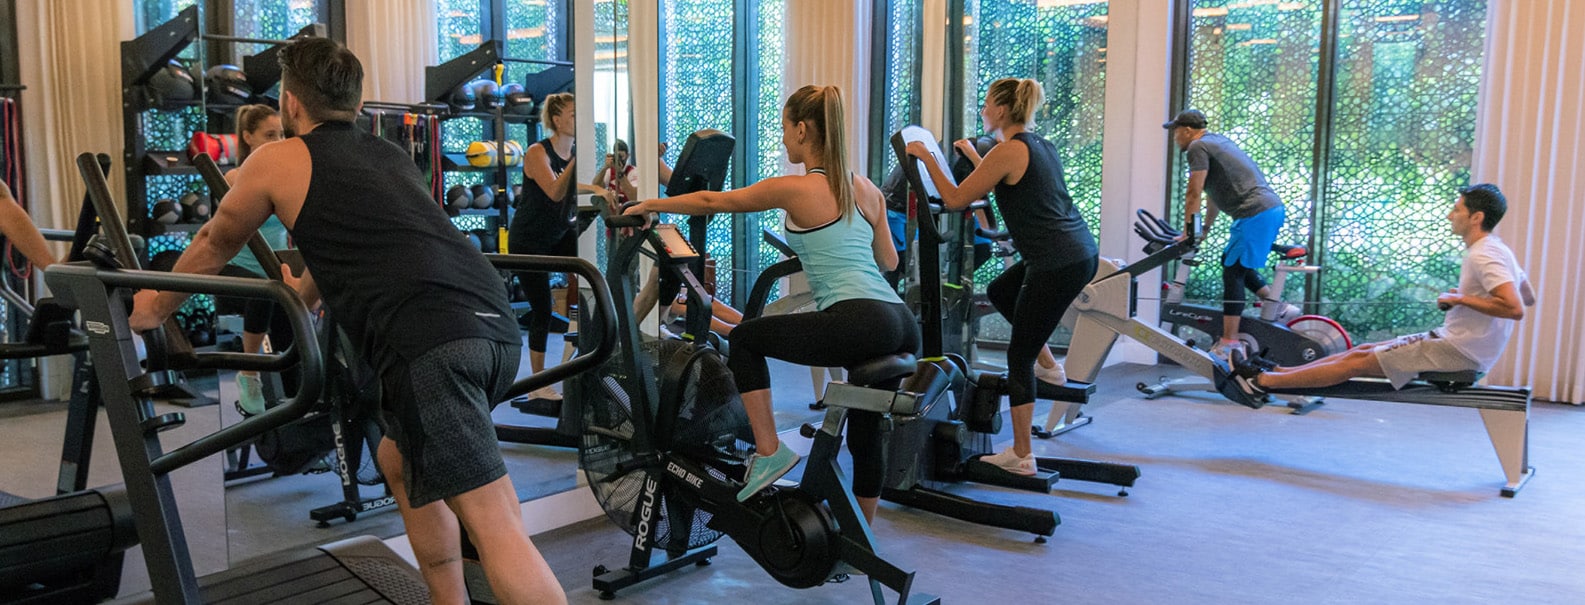 Why group fitness classes can take your workouts to the next level